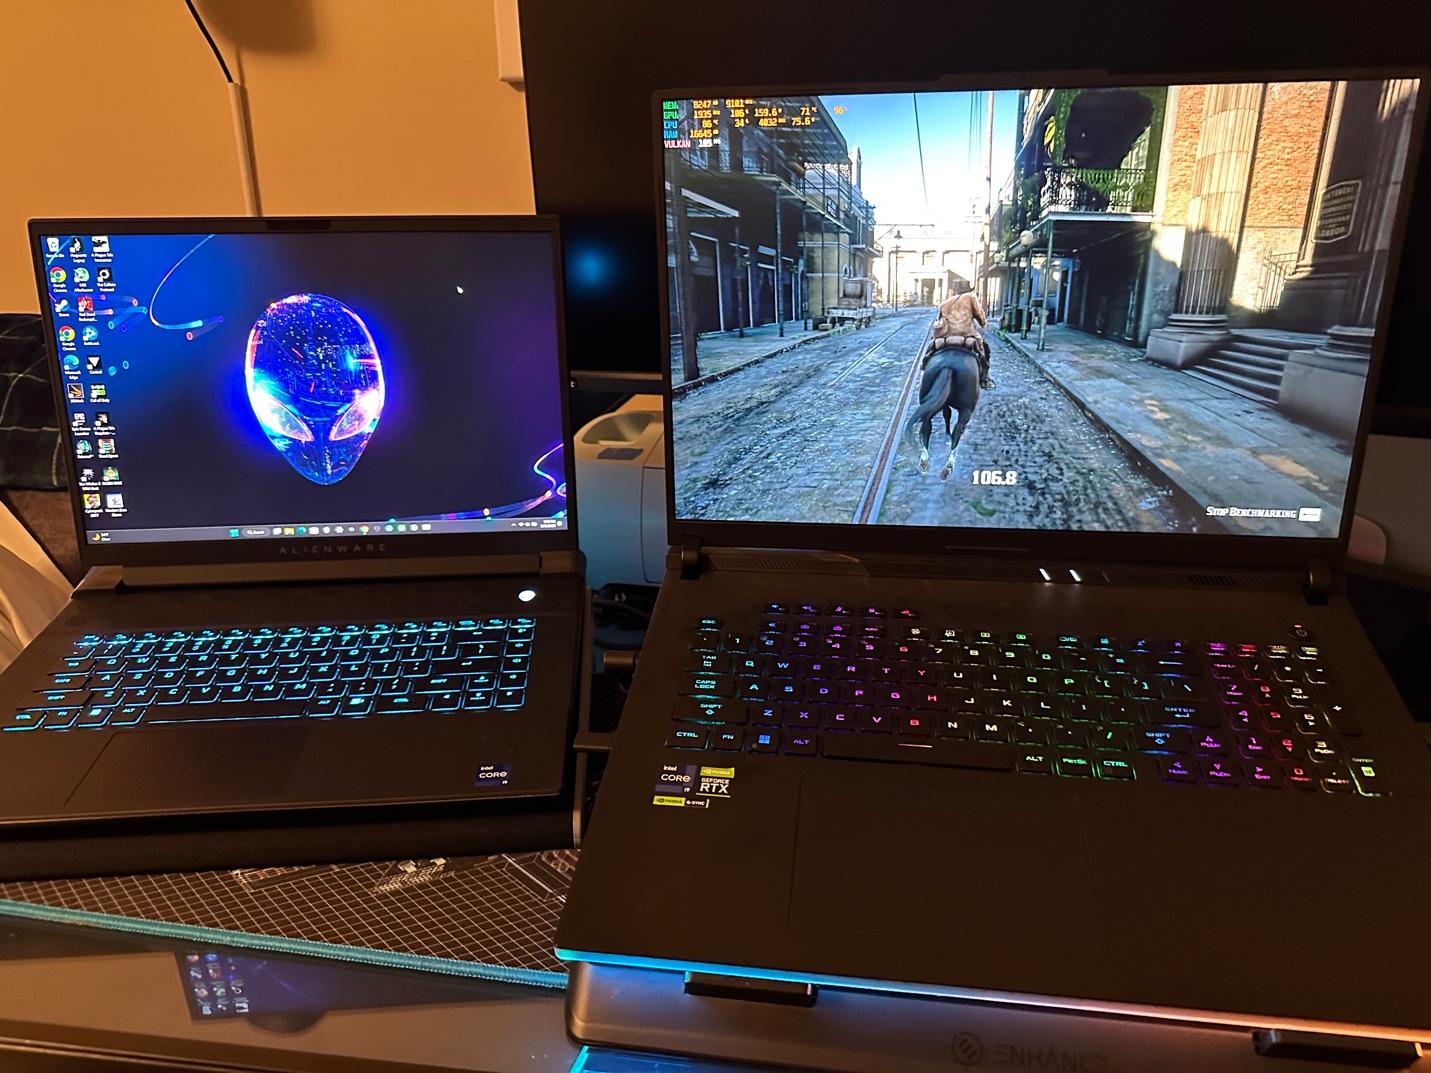 A laptops with a screen on

Description automatically generated